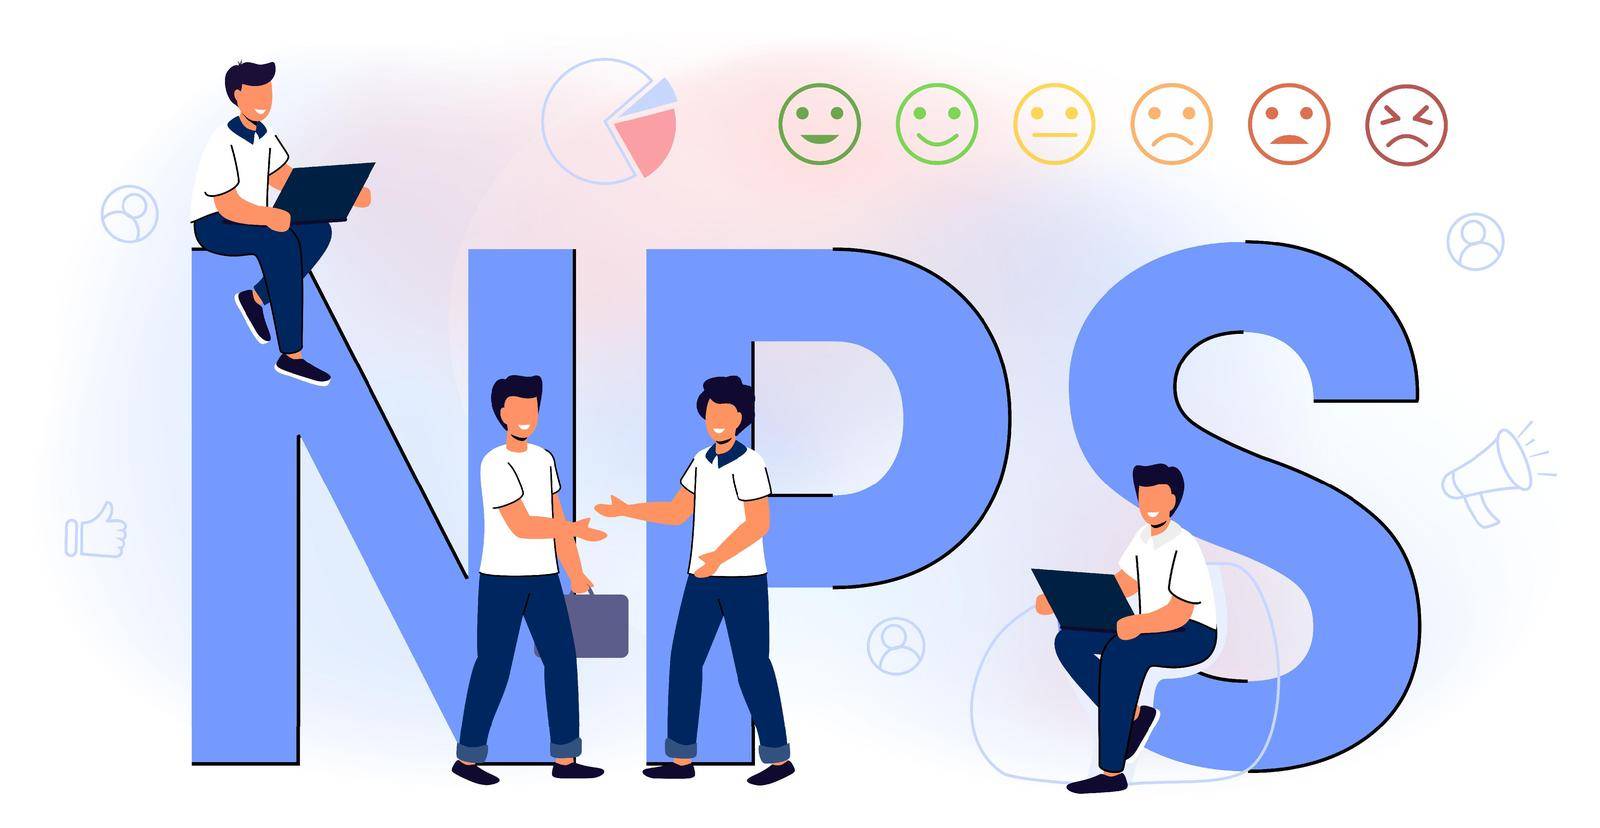 NPS Net promoter score Business strategy Formula promotion marketing scoring Promotional netting Teamwork Flat vector illustration Measures customer experience and predicts business growth